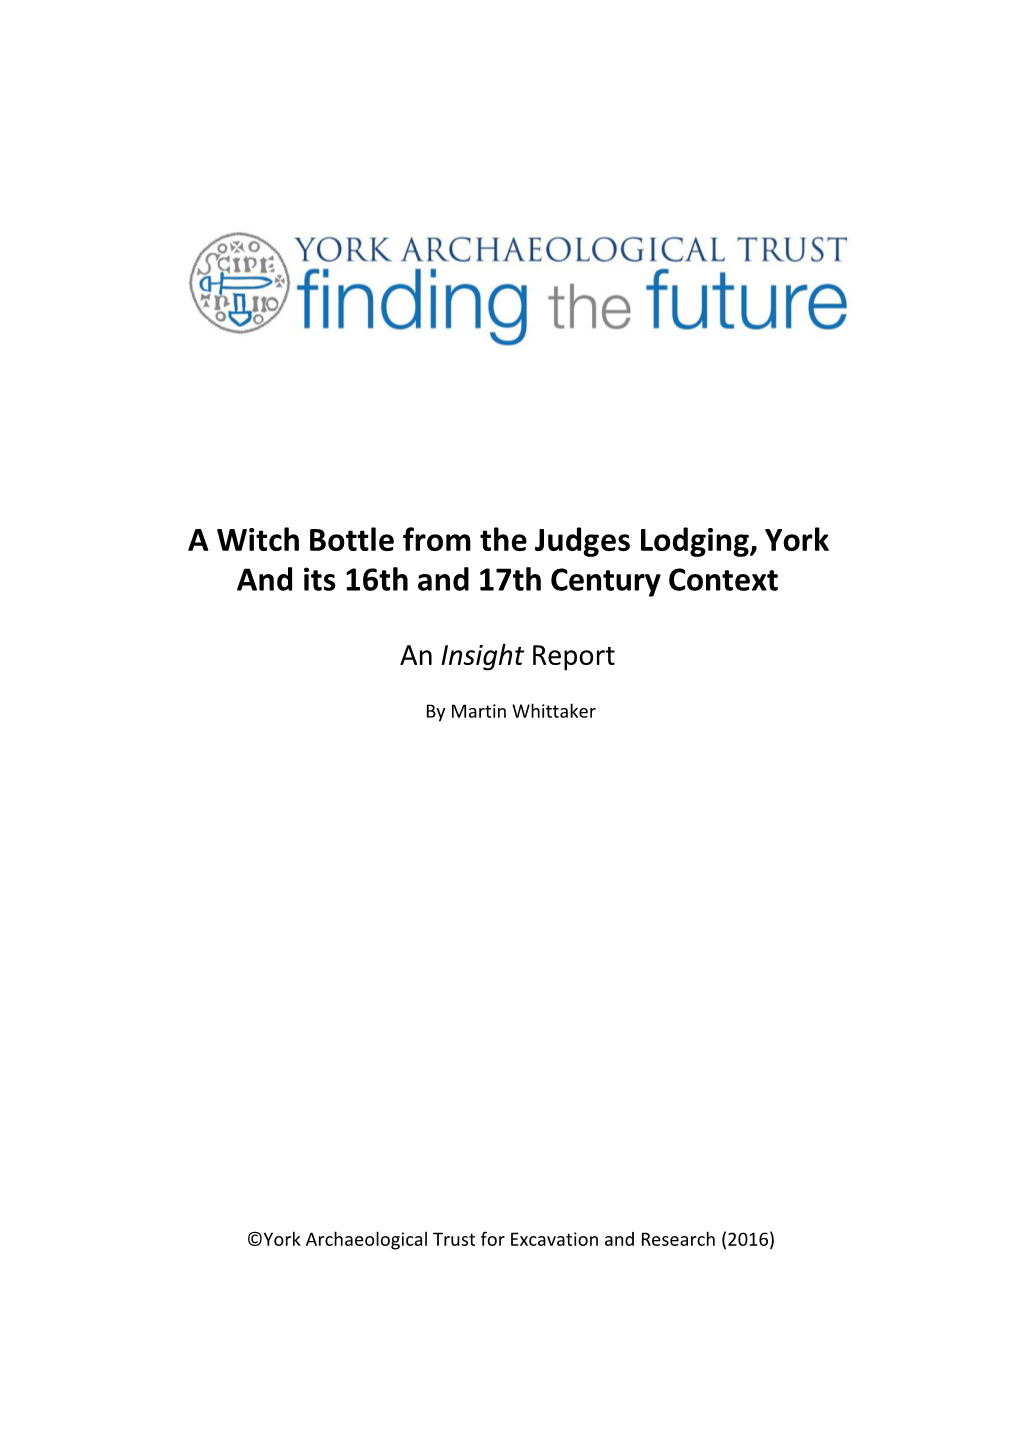 A Witch Bottle from the Judges Lodging, York, and Its 16Th and 17Th Century Context By